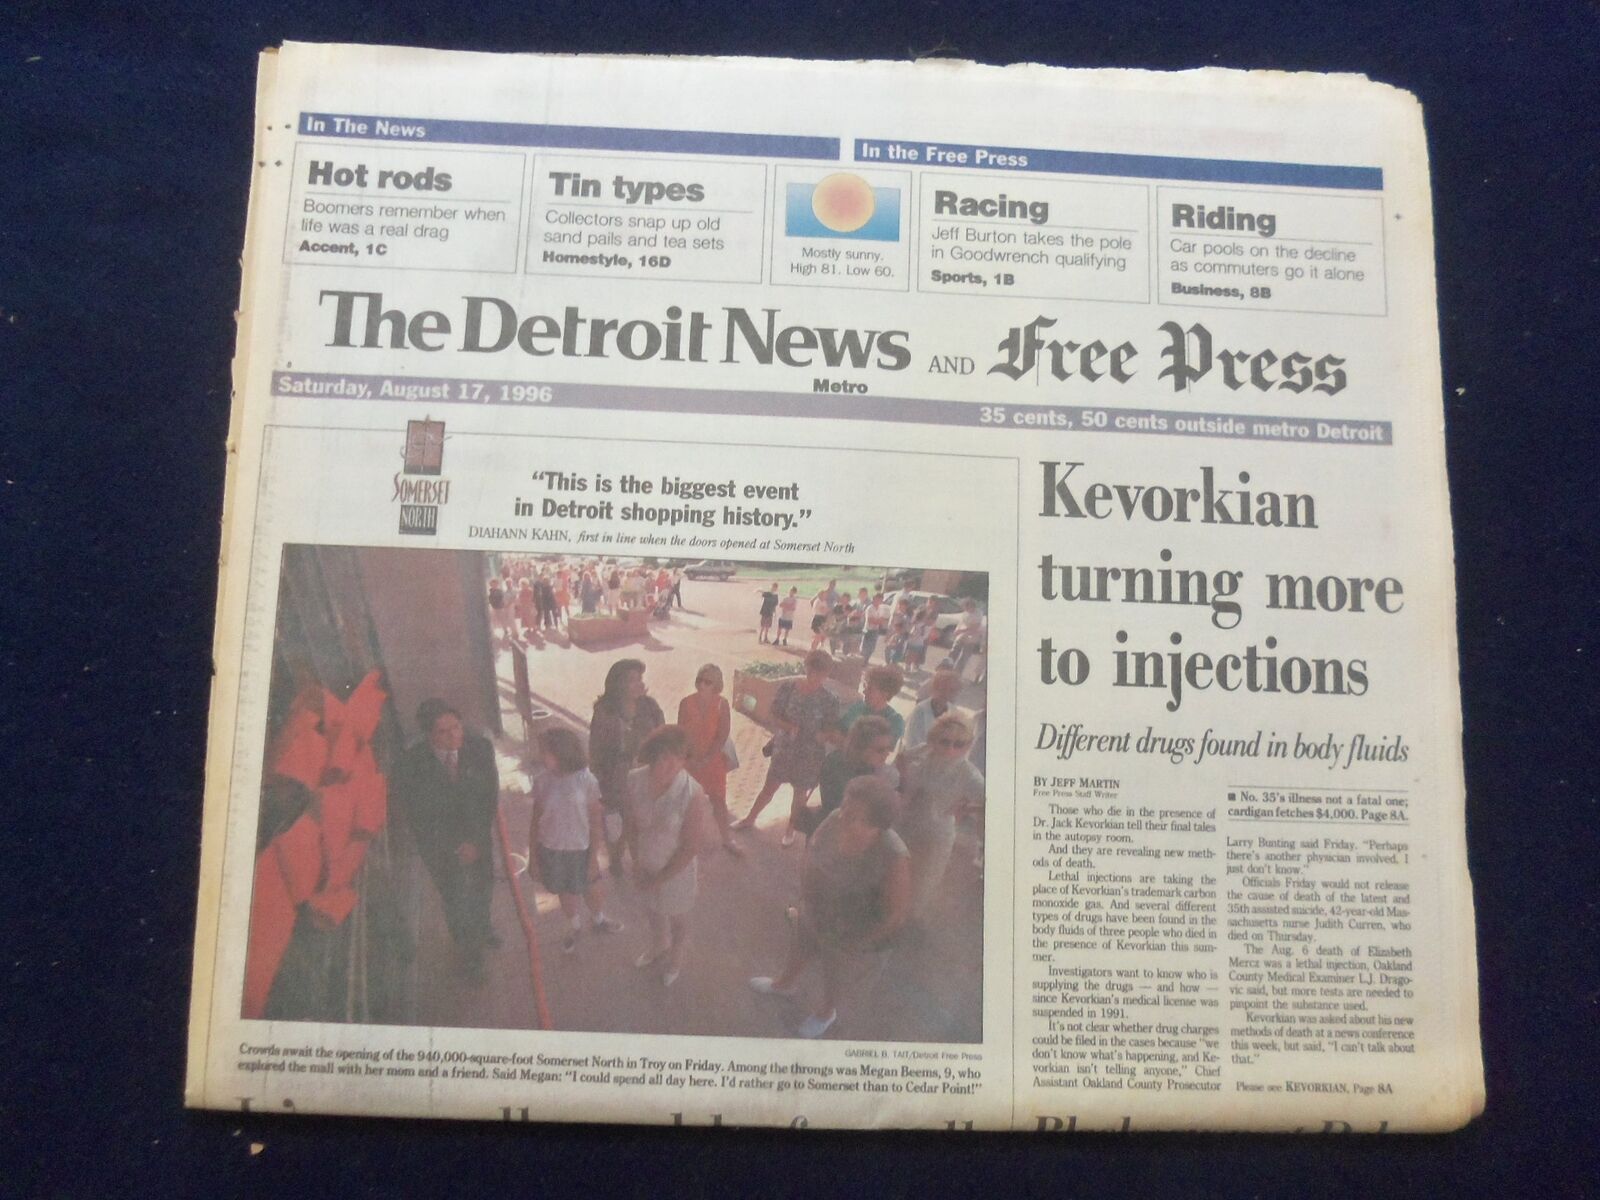 1996 AUG 17 DETROIT NEWS/FREE PRESS NEWSPAPER-KEVORKIAN MORE INJECTIONS- NP 7220